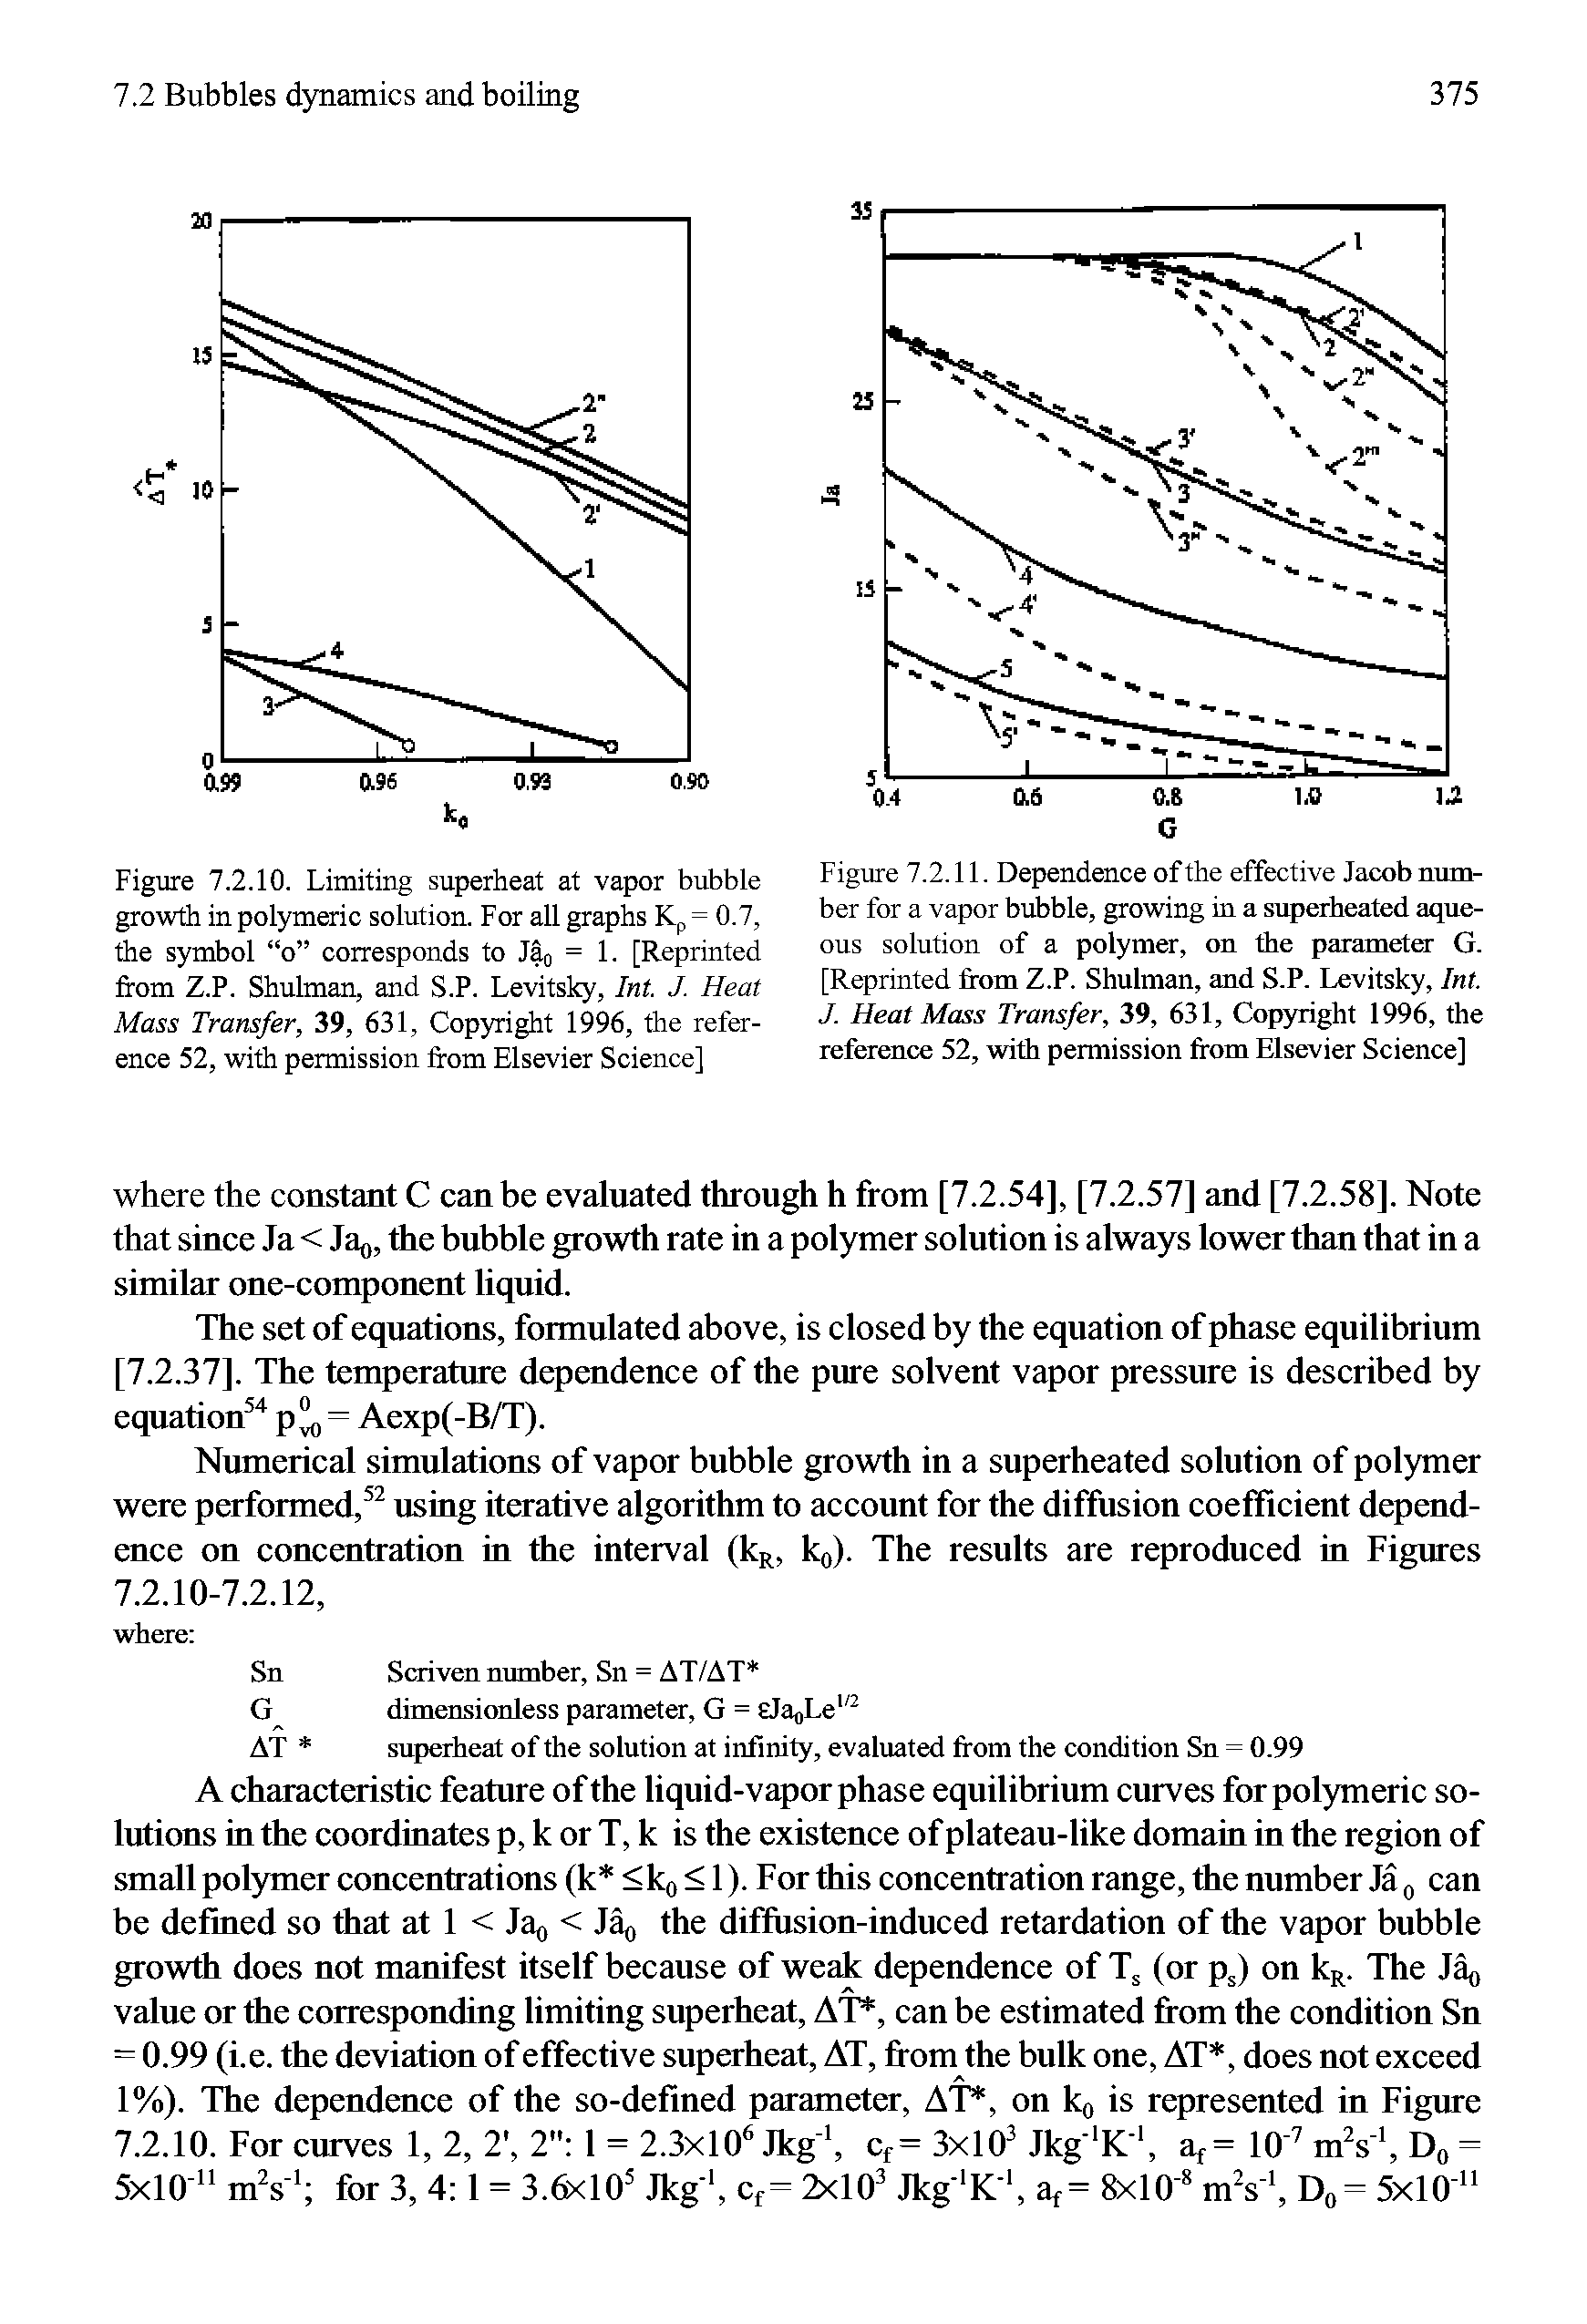 Figure 7.2.11. Dependence of the effective Jacob number for a vapor bubble, growing in a superheated aqueous solution of a polymer, on the parameter G. [Reprinted from Z.P. Shulman, and S.P. Levitsky, Int. J. Heat Mass Transfer, 39, 631, Copyright 1996, the reference 52, with permission from Elsevier Science]...